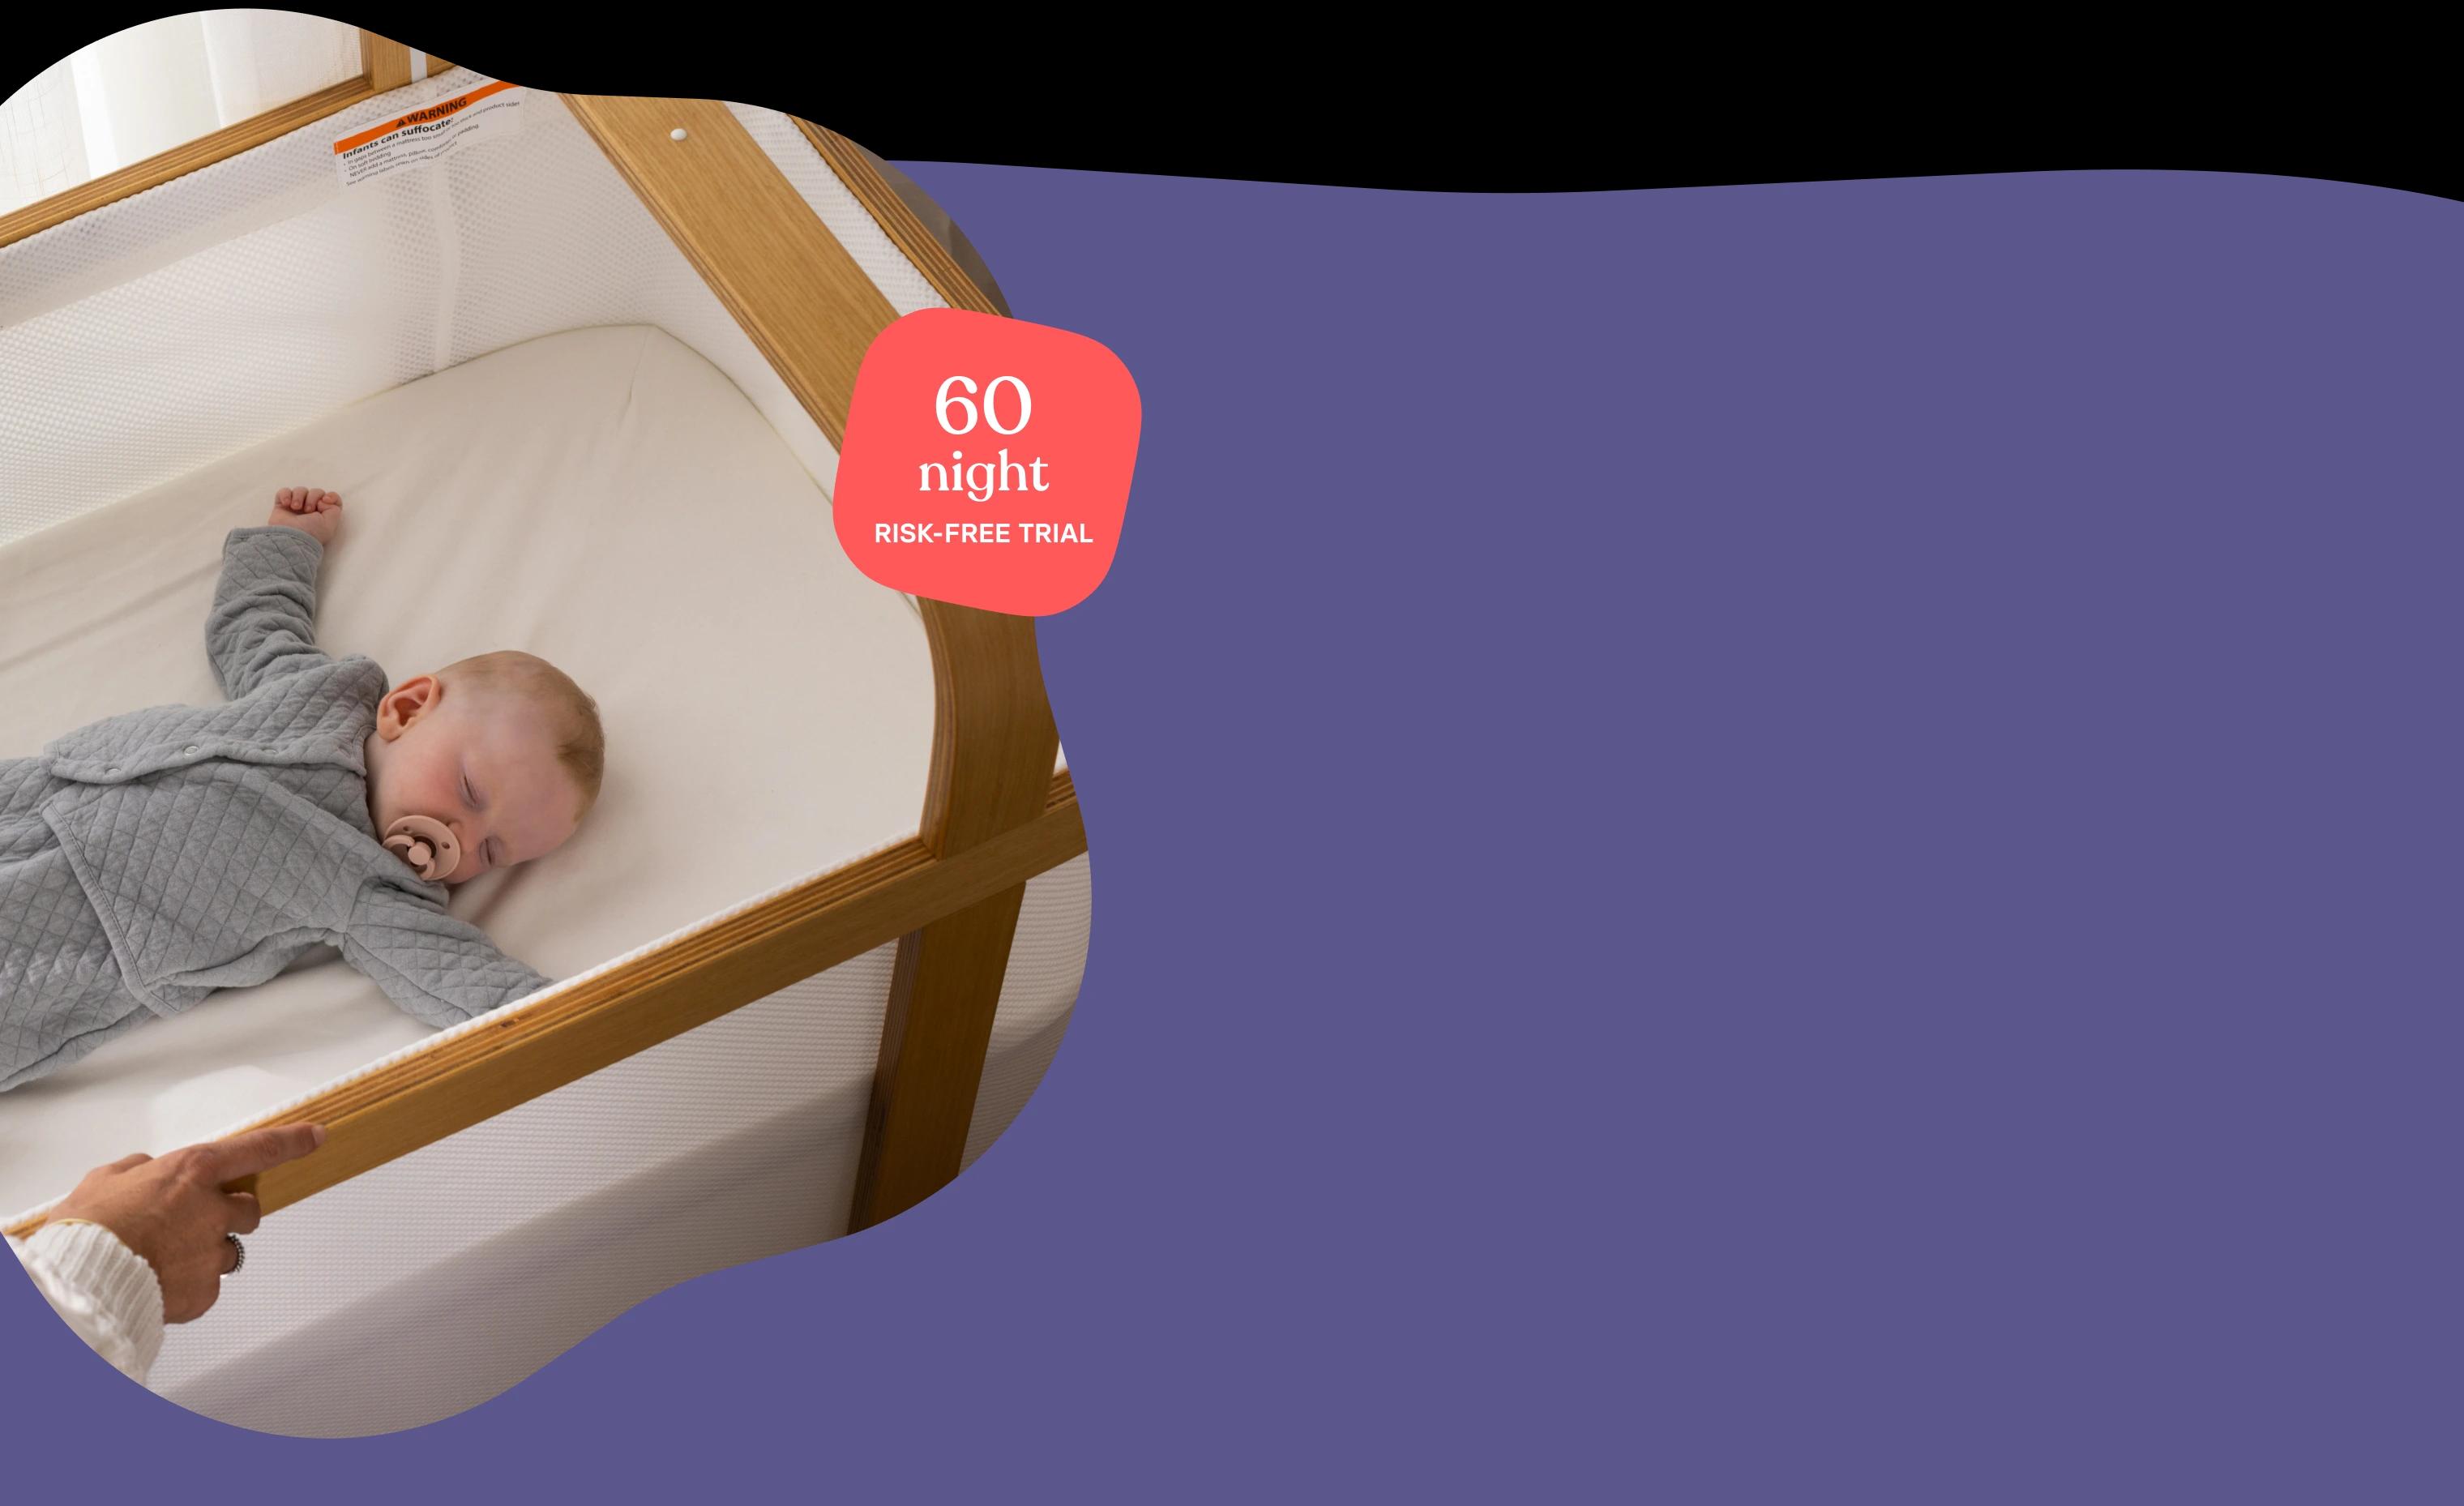 Cradlewise: All-in-One Smart Bassinet, Crib, Baby Monitor and more